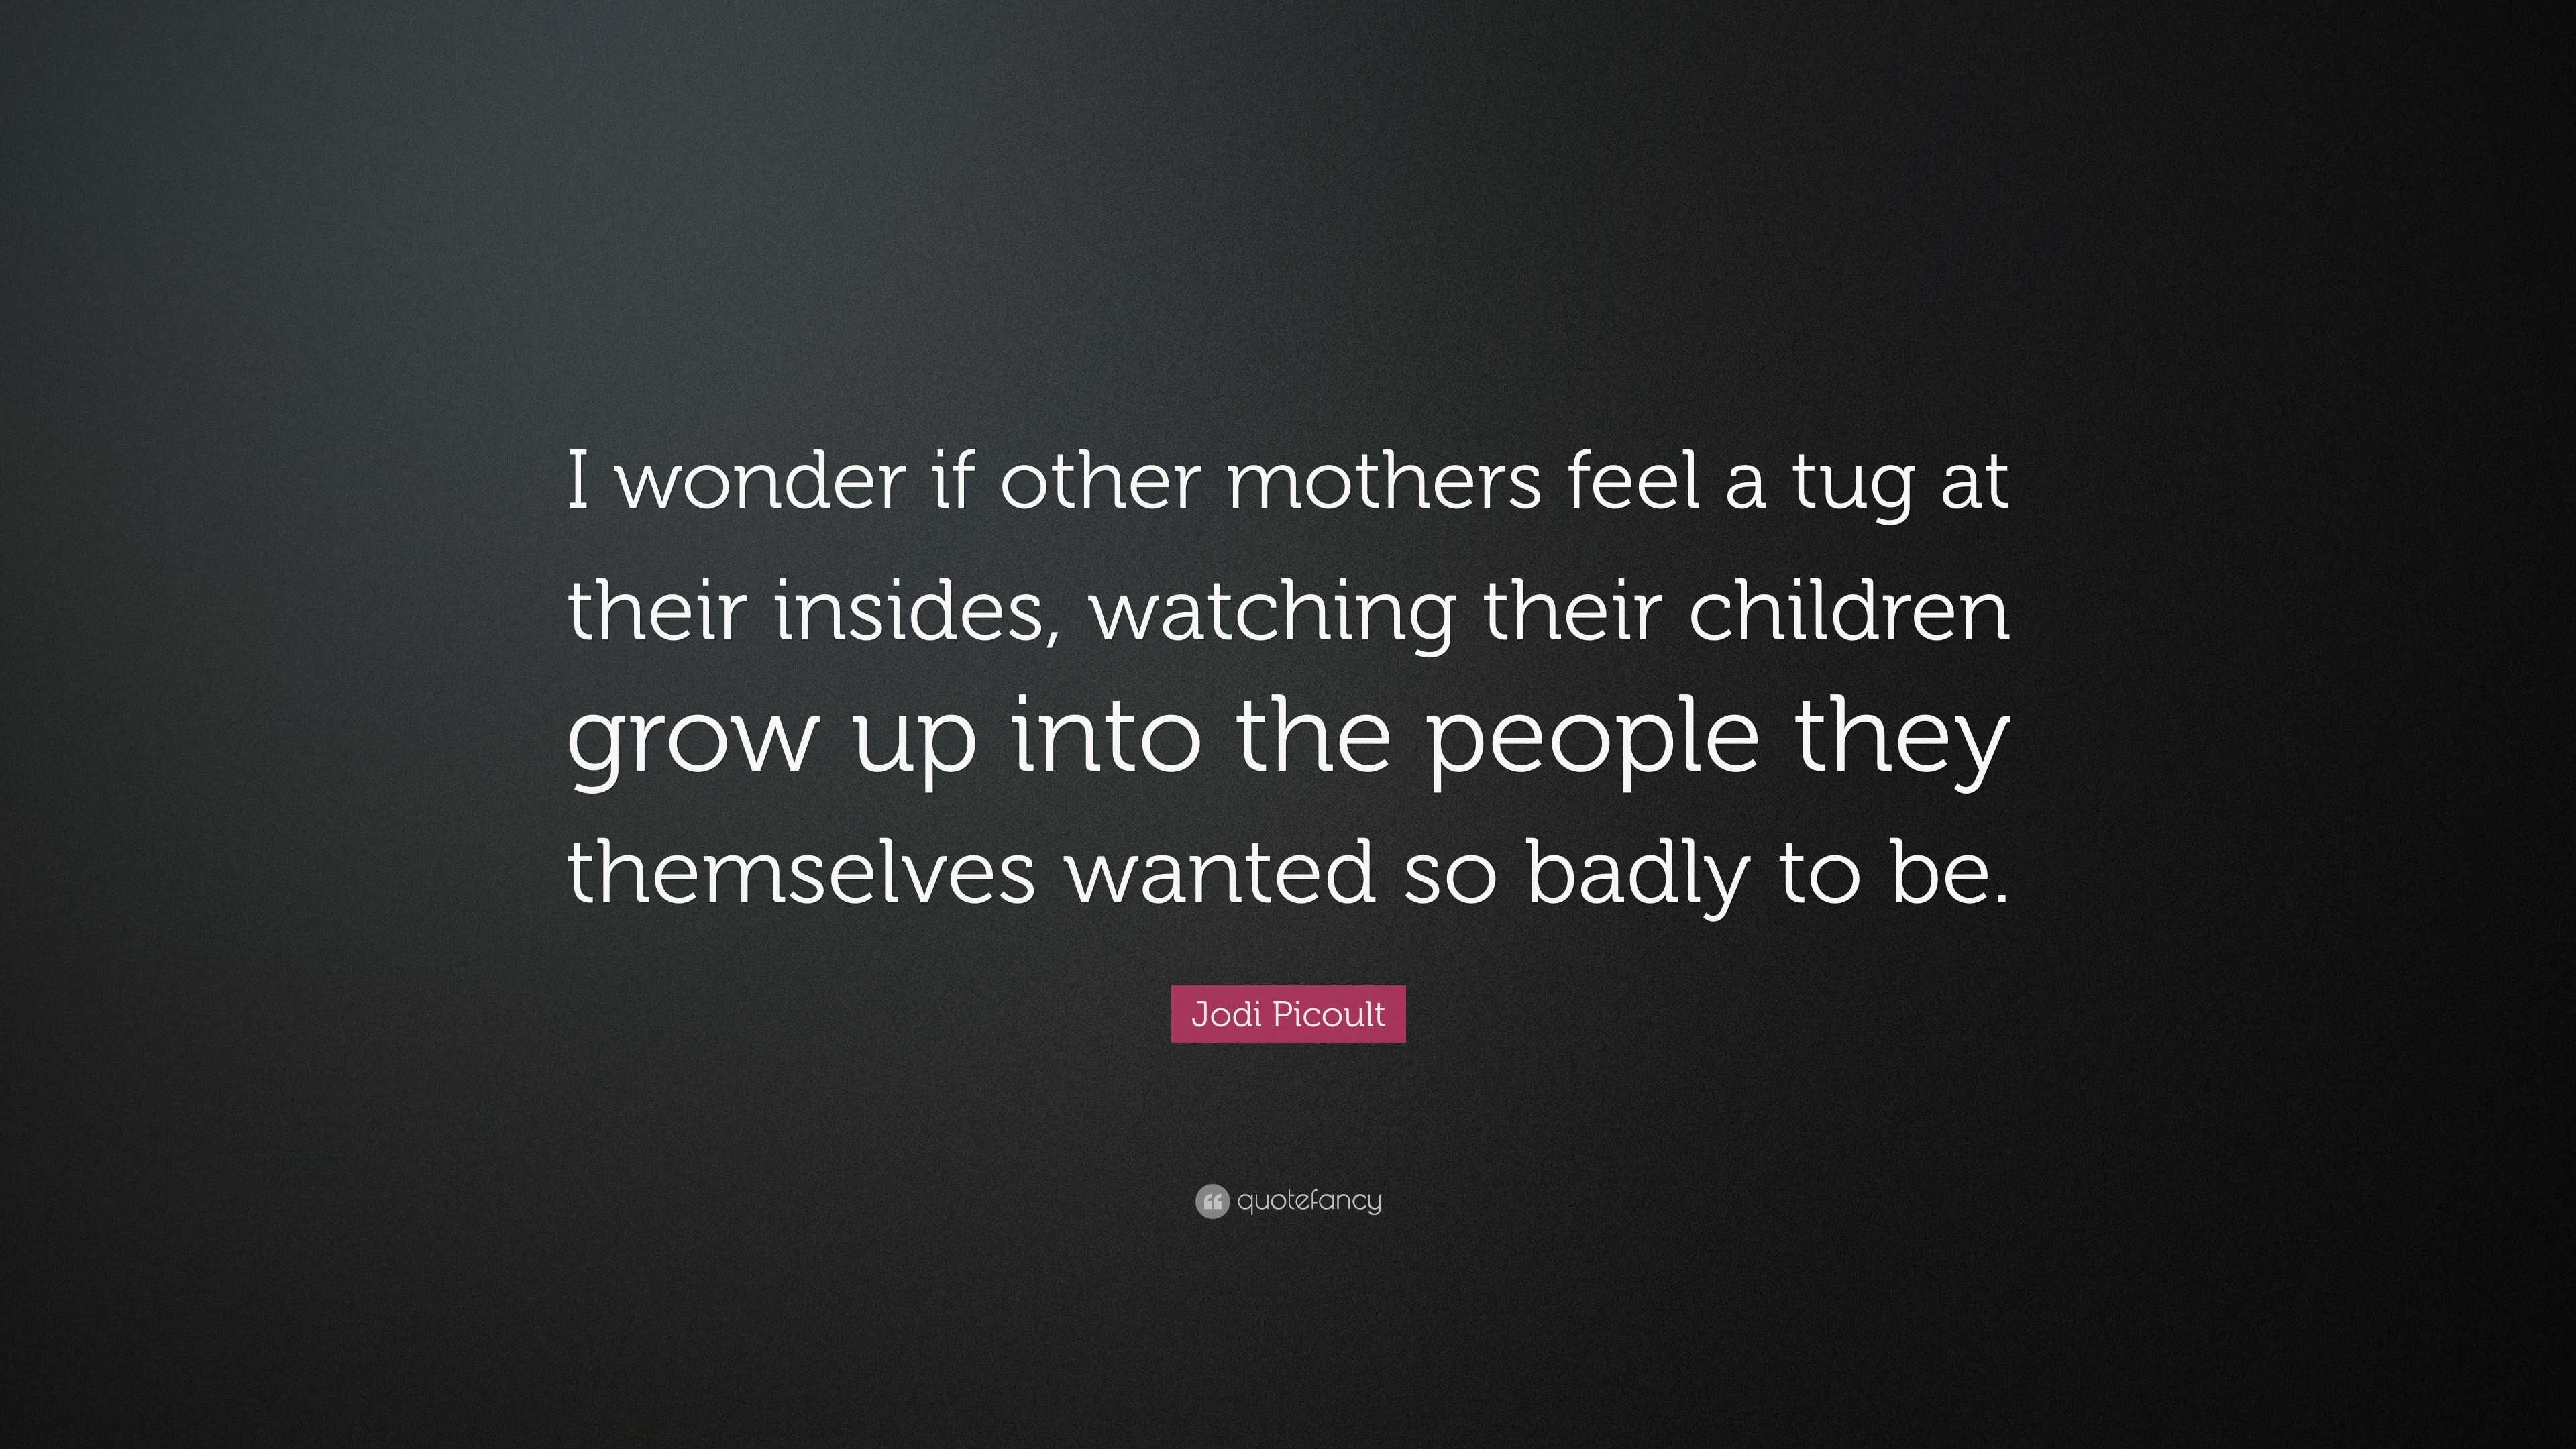 Jodi Picoult Quote: “I wonder if other mothers feel a tug at their ...